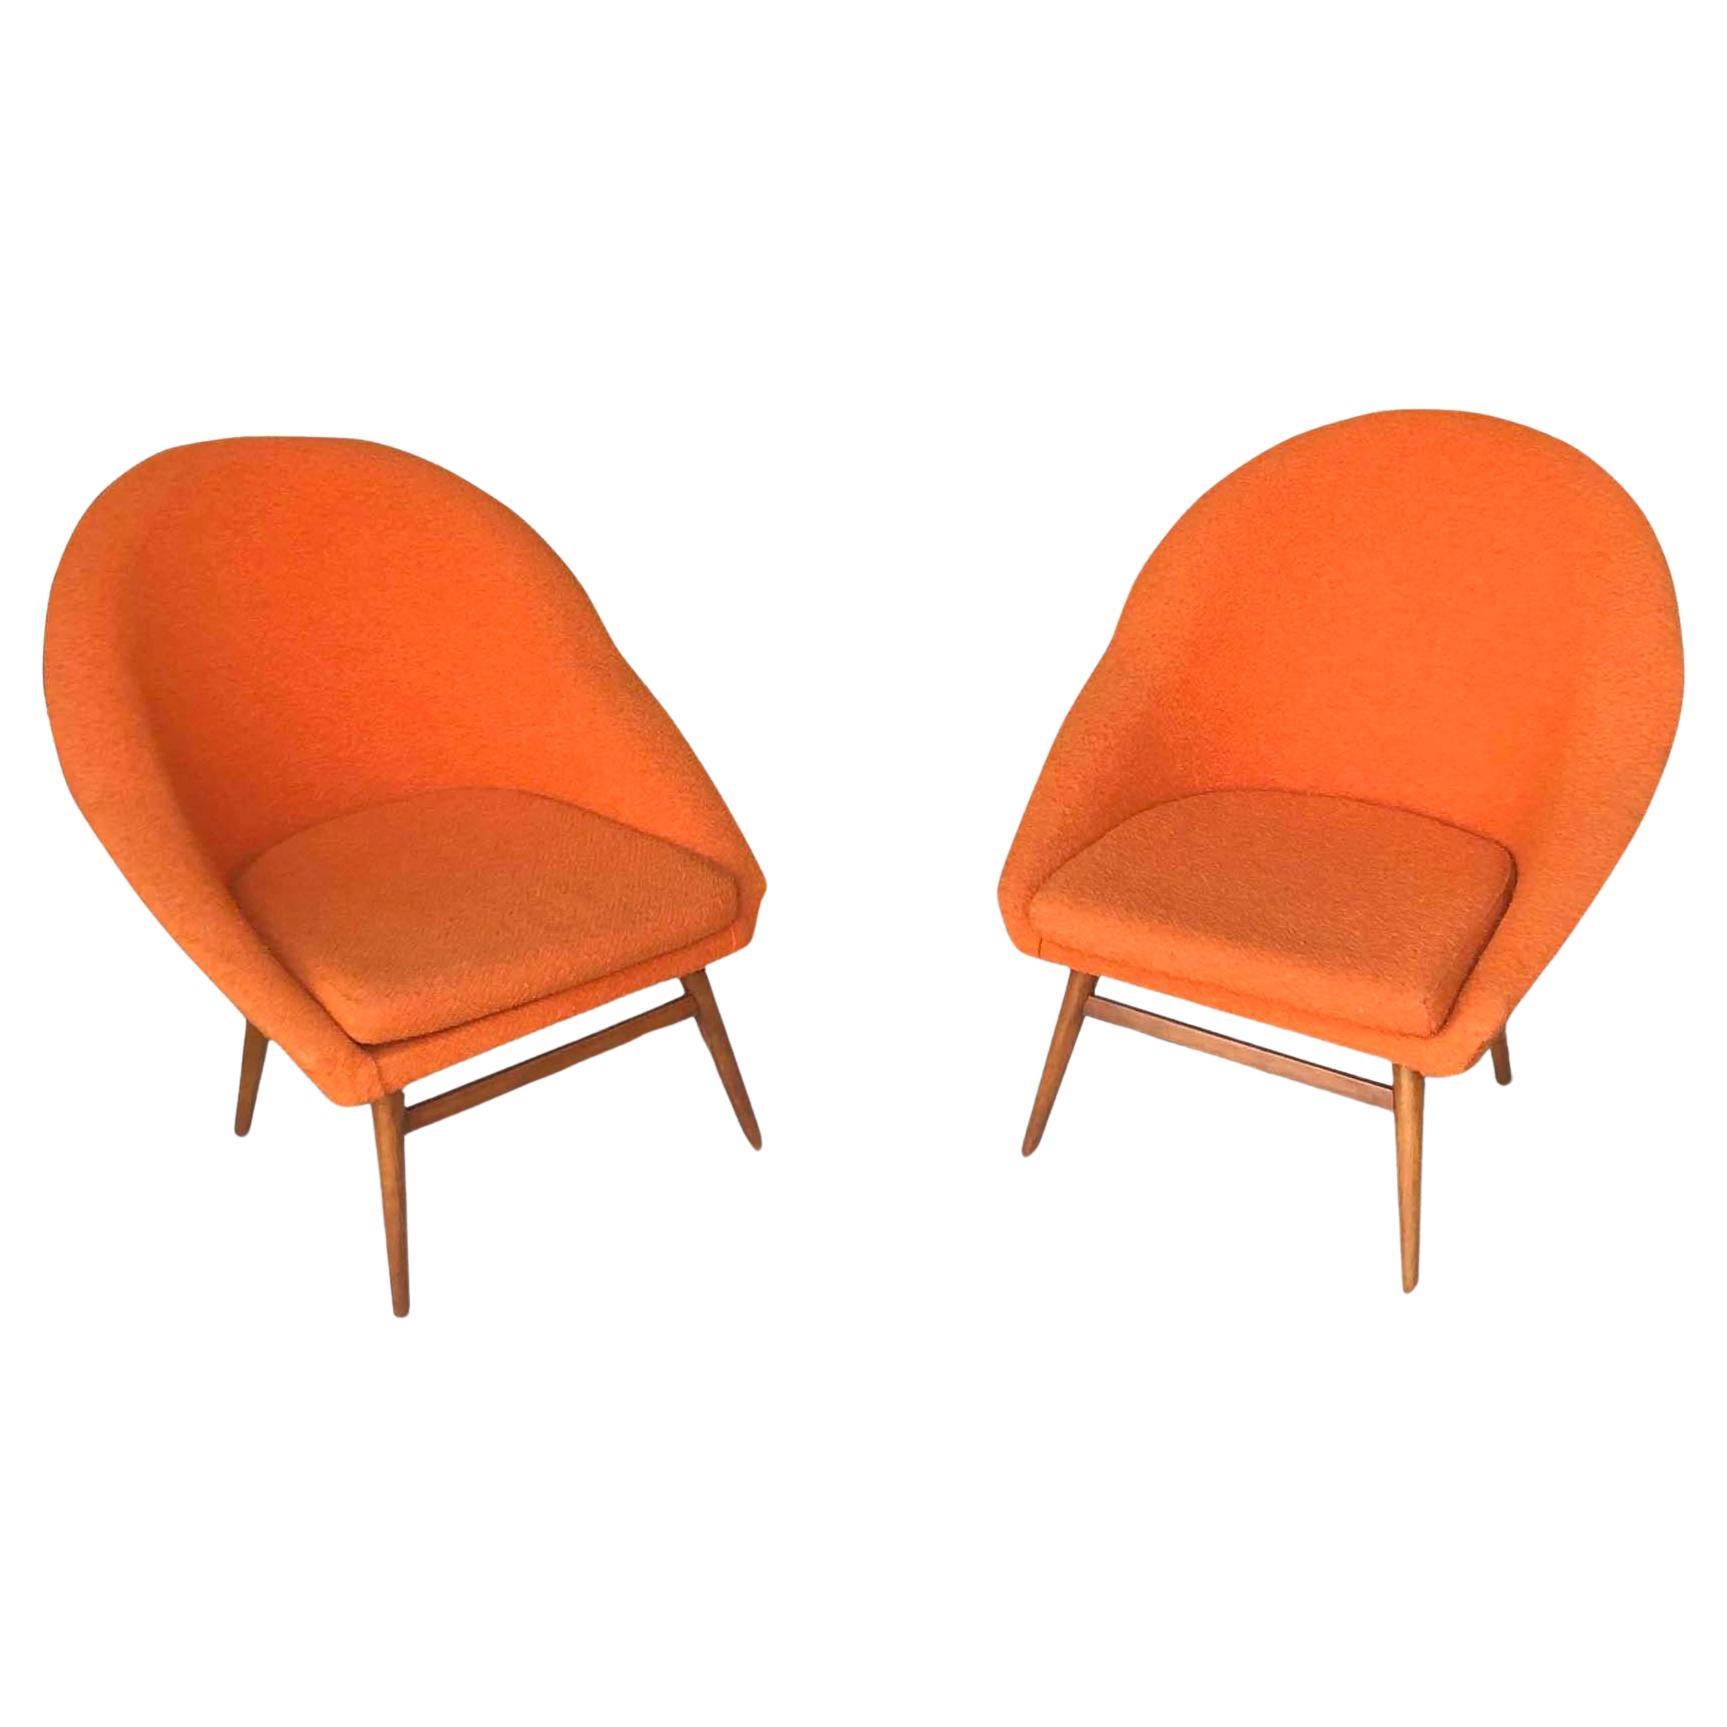 Vintage Orange Bucket Seats or Cocktail Chairs, 1960s For Sale